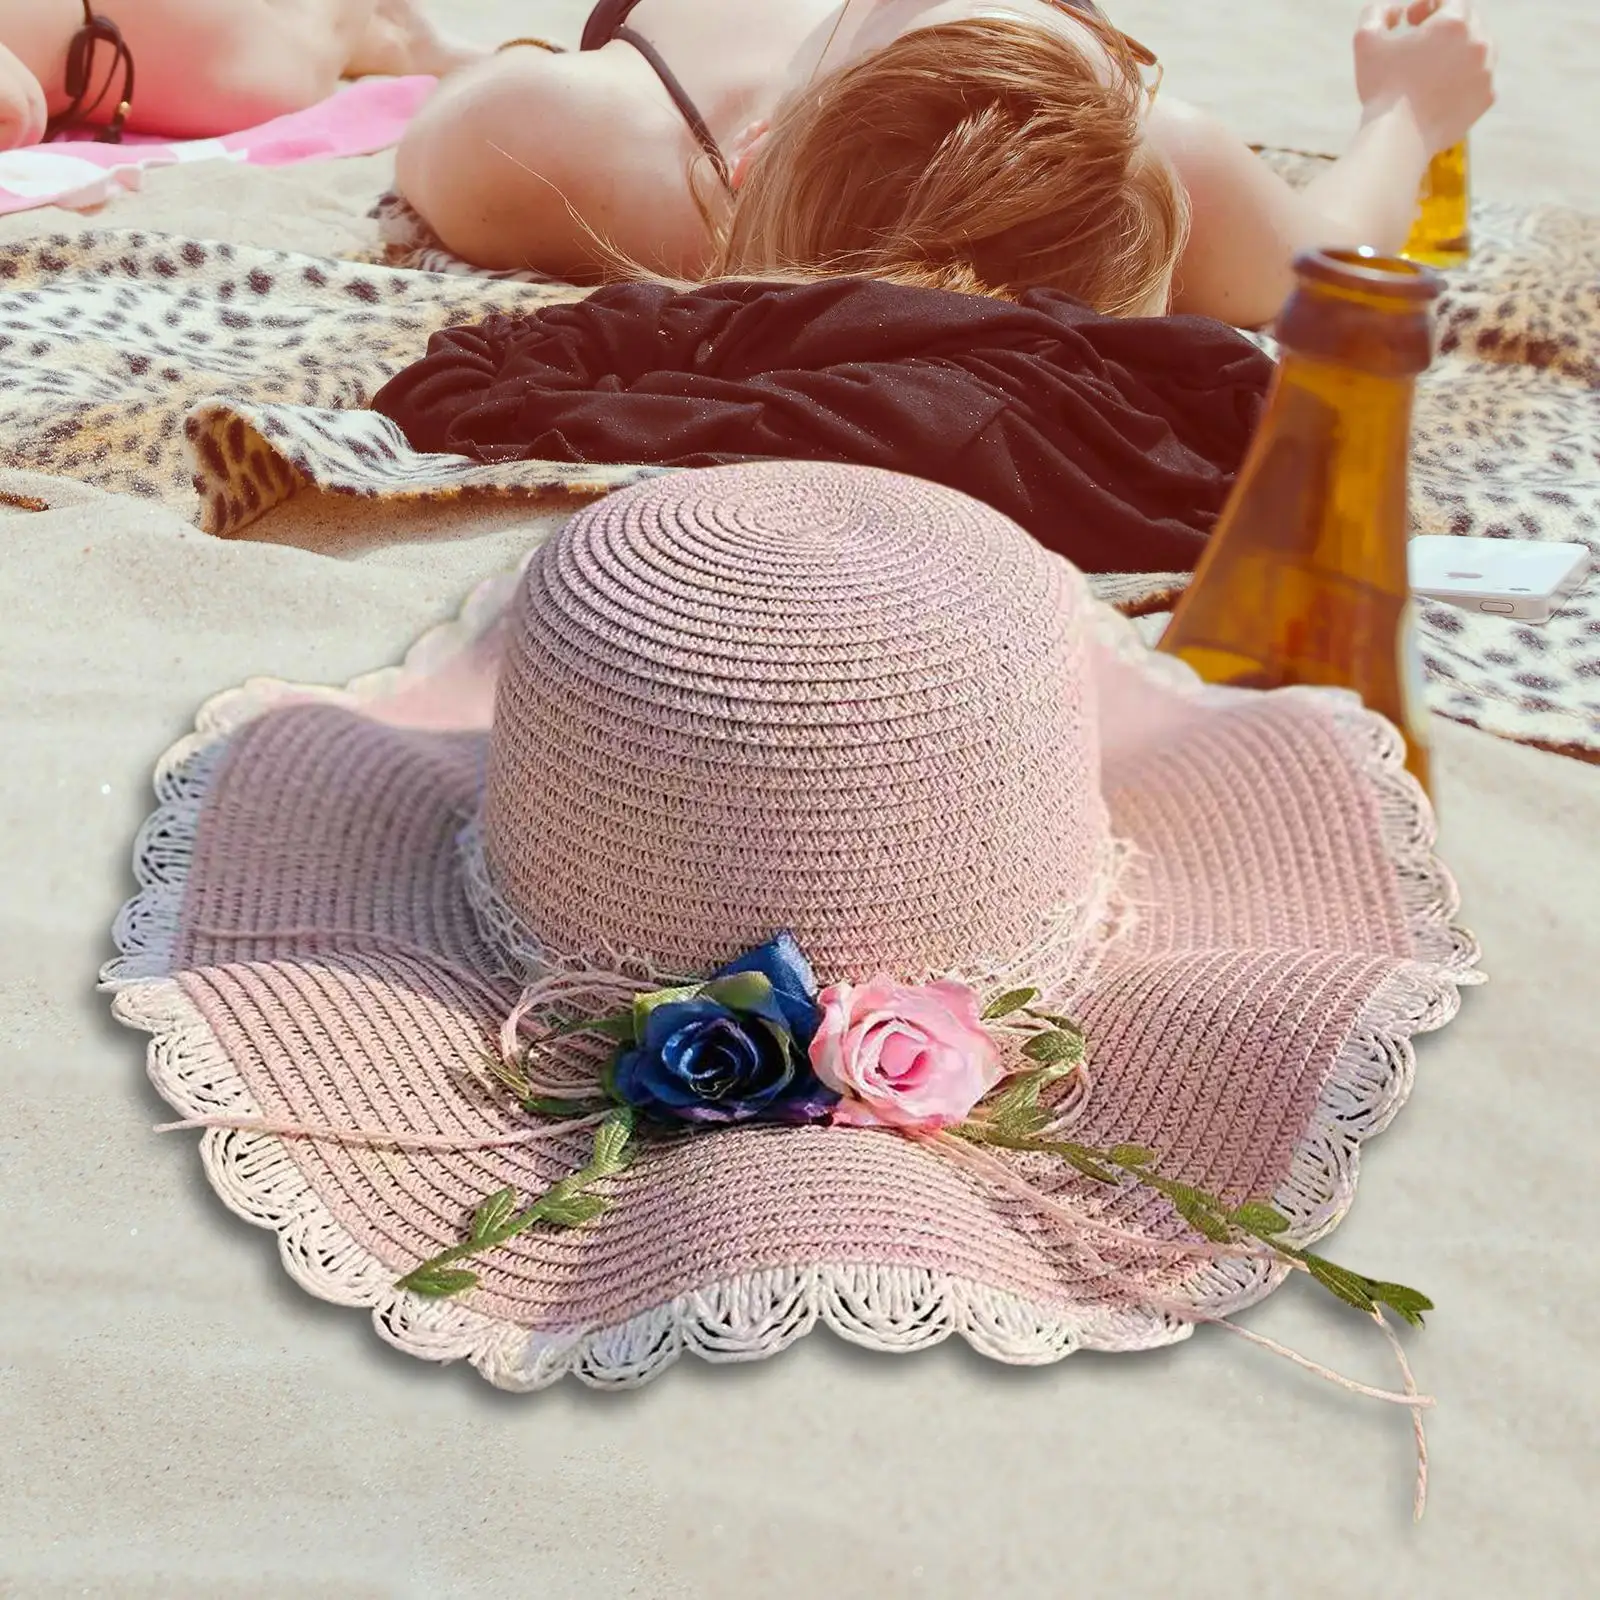 Straw Hats Rose Embellishments Lightweight Durable Portable Big Eaves Hat Sun Hats for Travel Short Trips Gift Parties Street